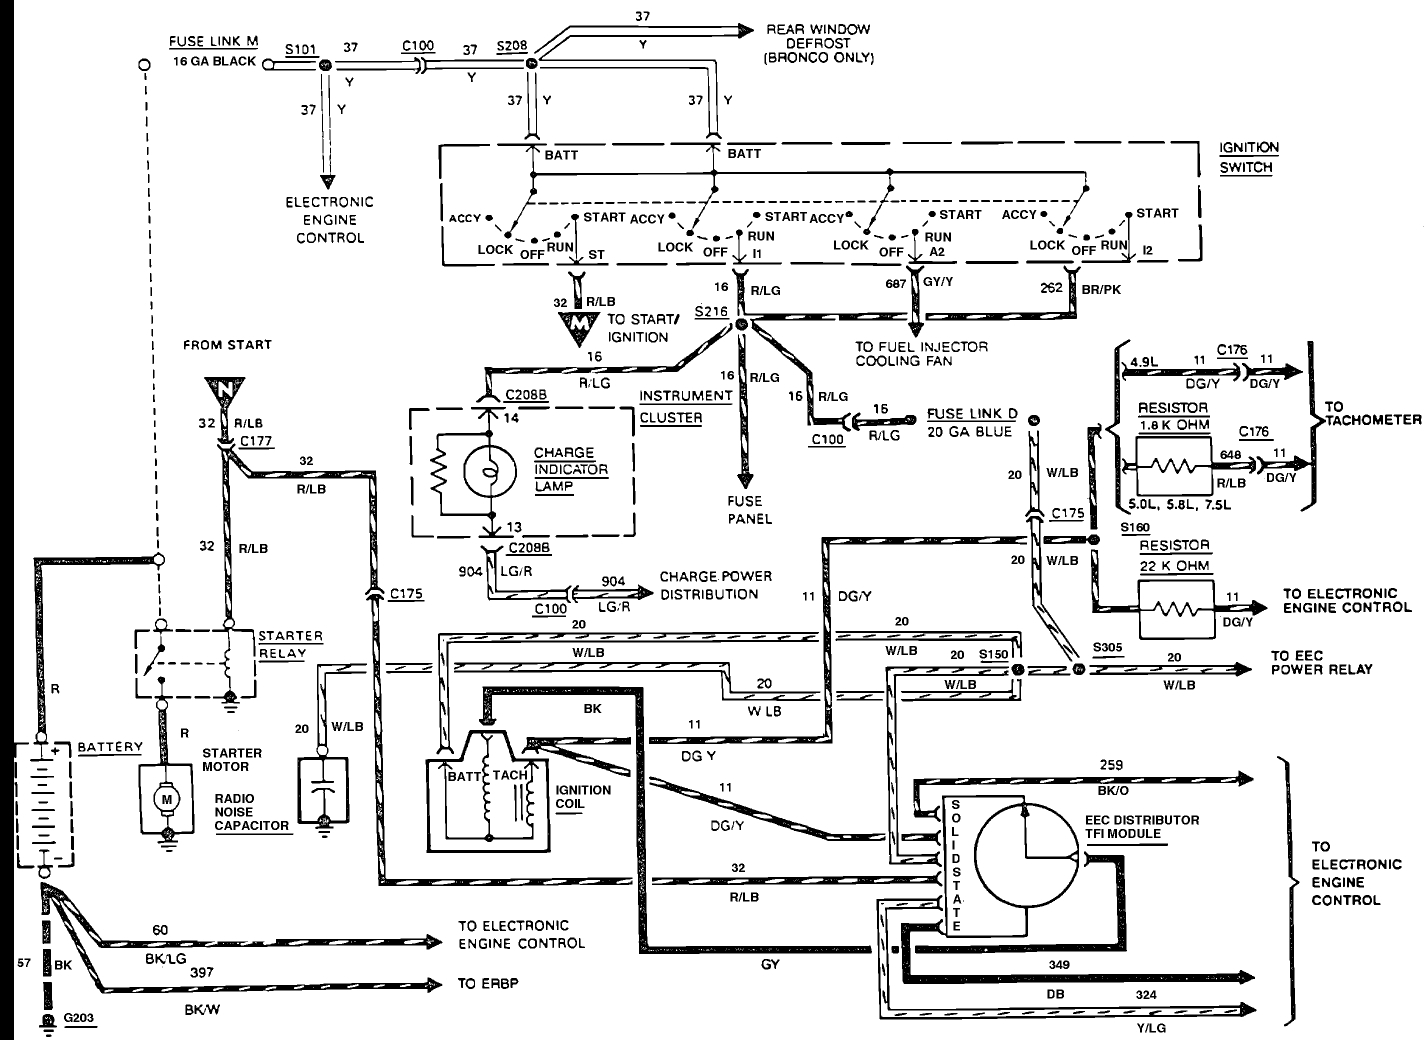 7.3 Powerstroke Fuel Line Diagram Wiring Diagrams Furthermore 1989 Ford F 250 Fuel System Diagram